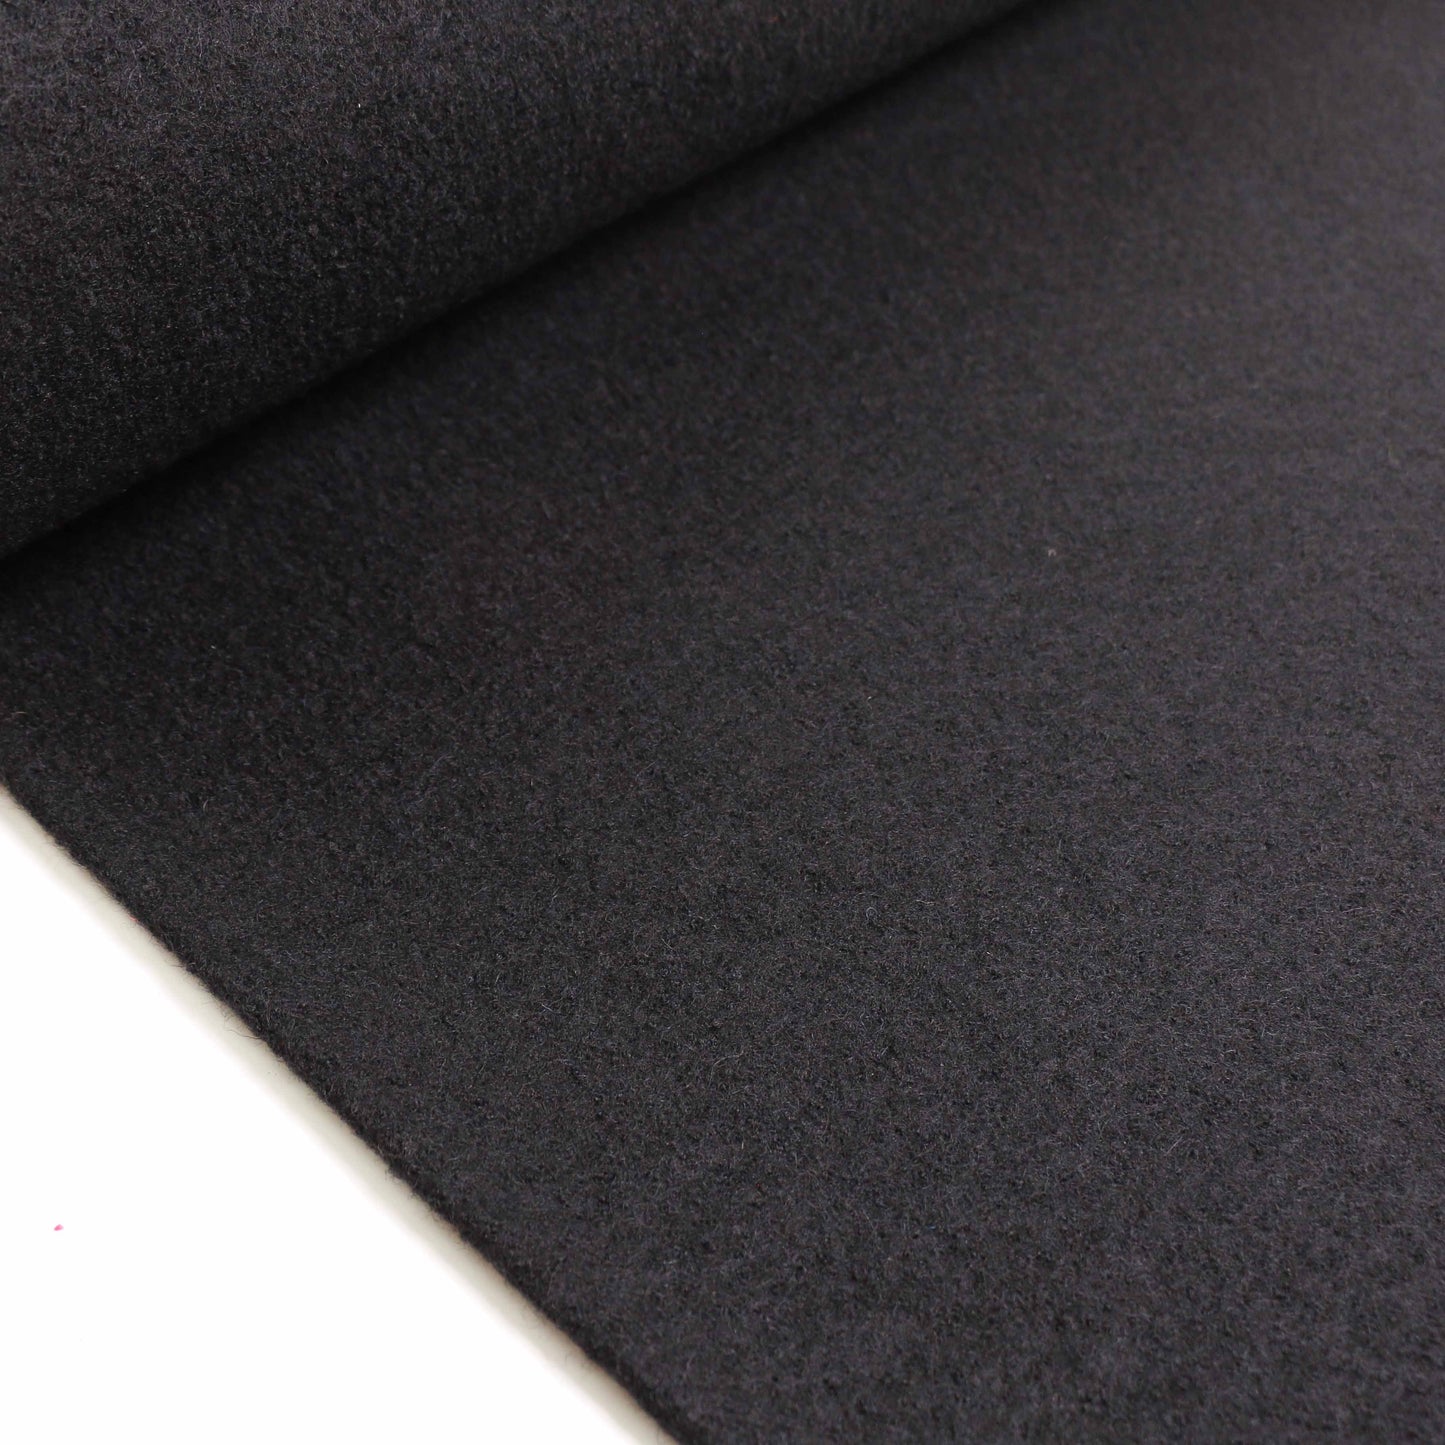 Boiled Wool Fabric - Mustard, charcoal, black, navy, teal